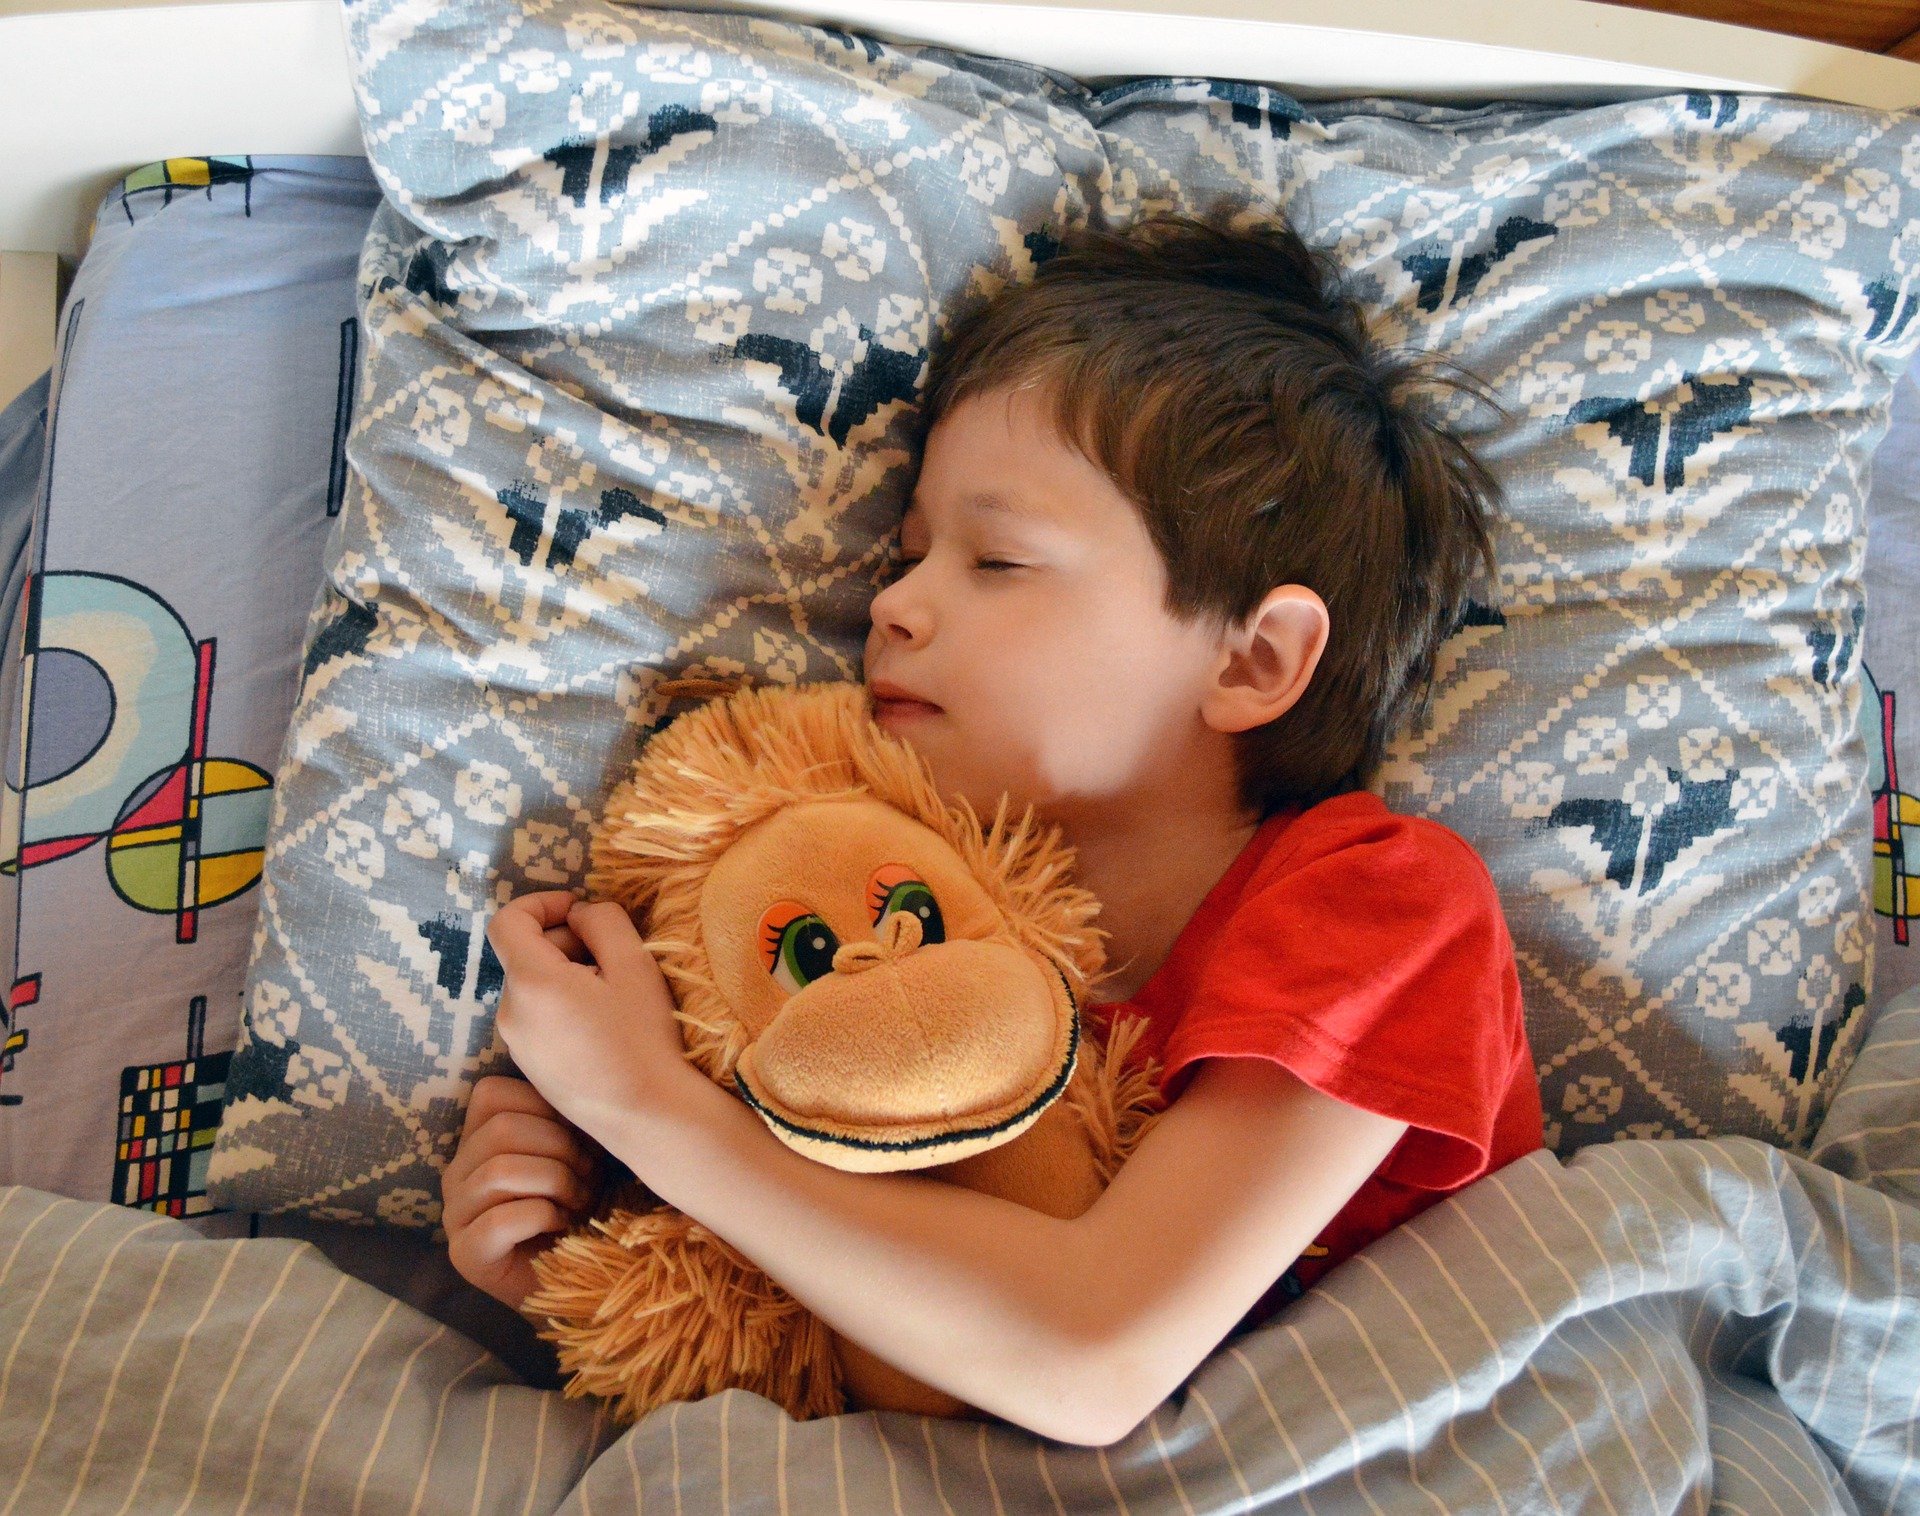 A little boy sleeping in bed while holding a stuffed toy | Photo: Pixabay/my best in collections - see and press